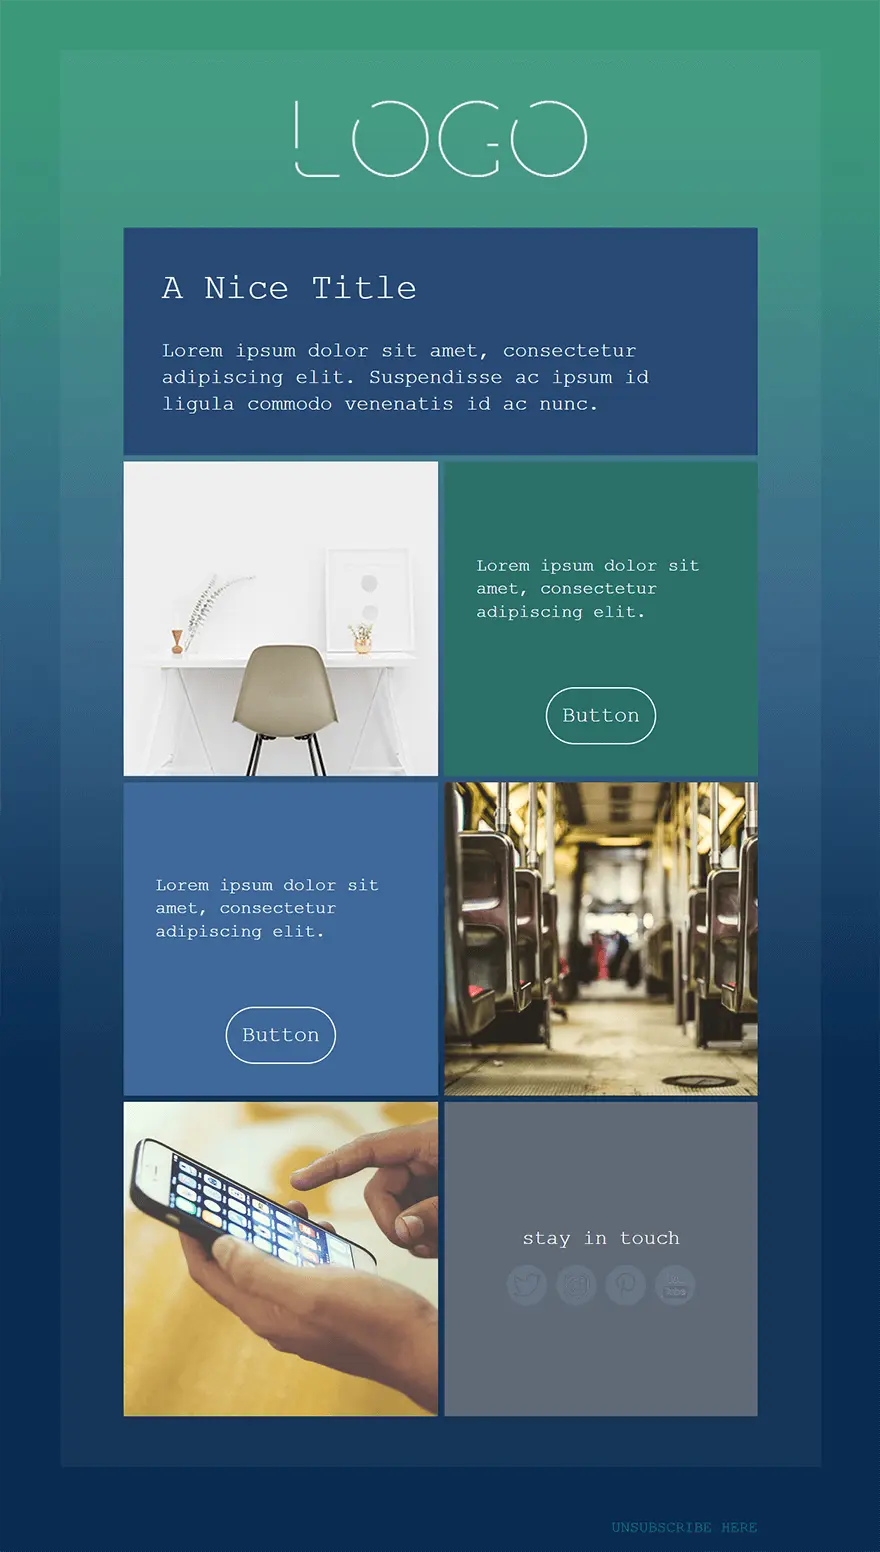 A well-designed email newsletter template